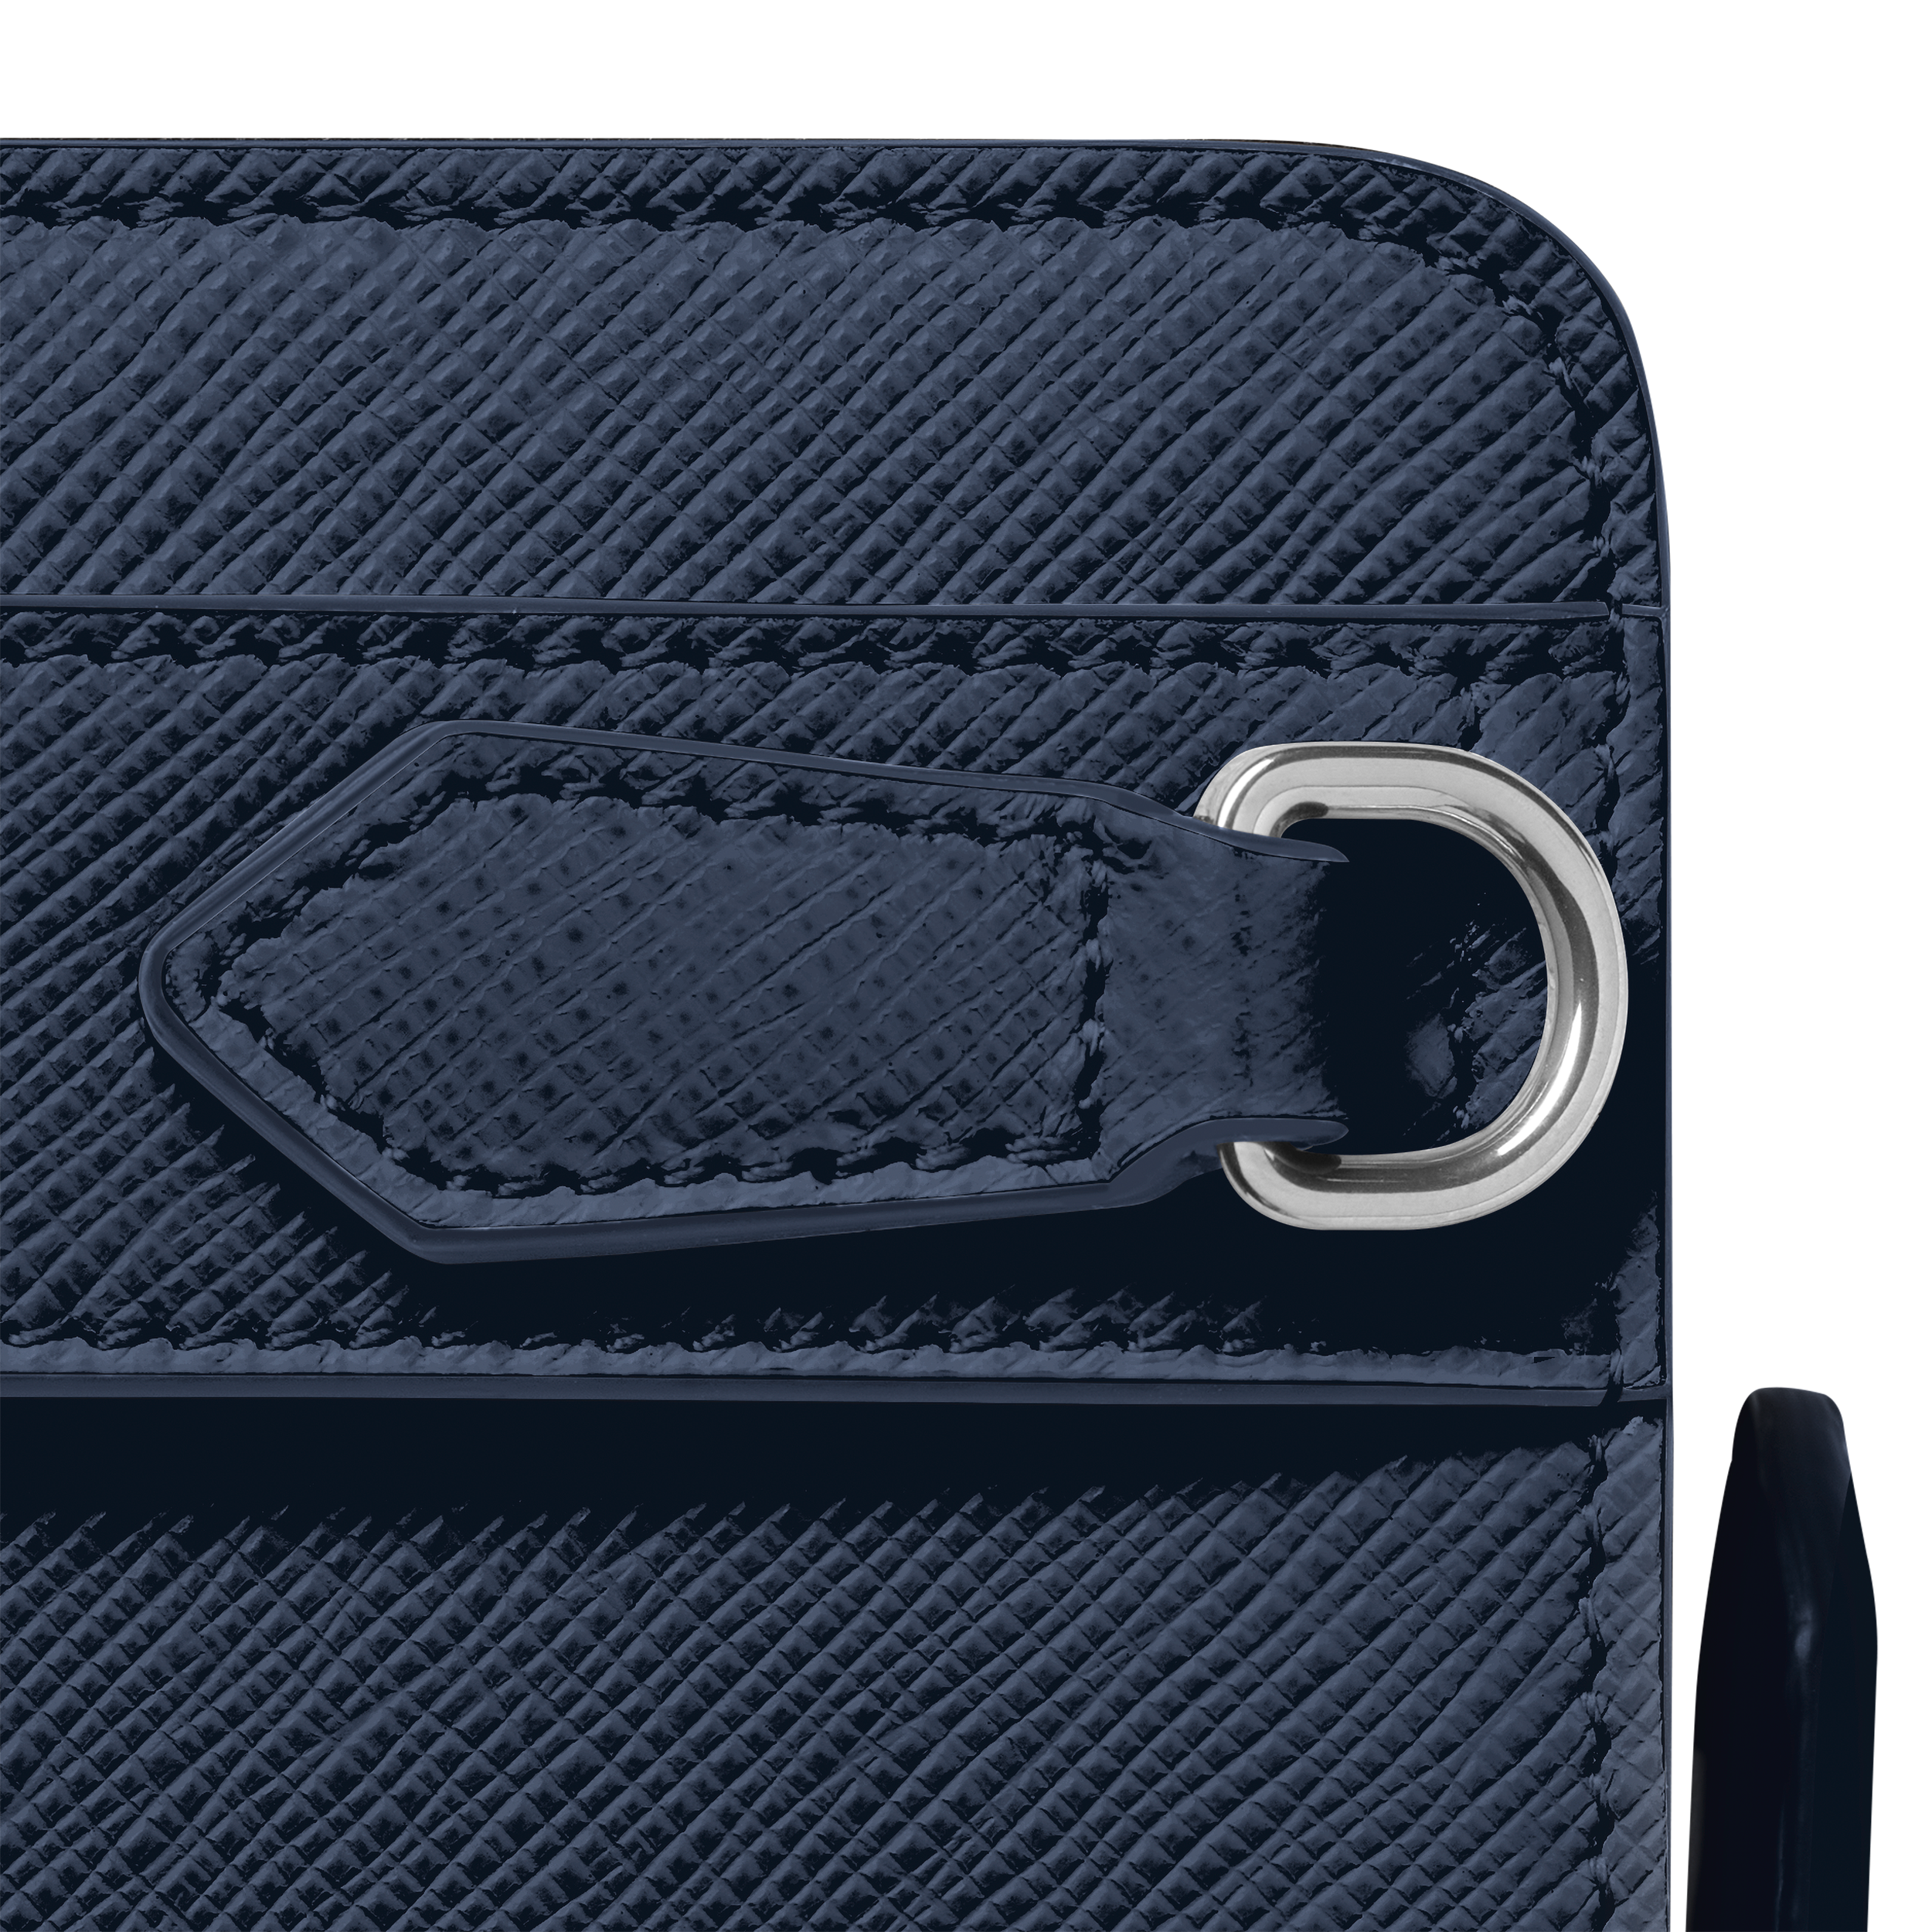 Montblanc Sartorial phone pouch